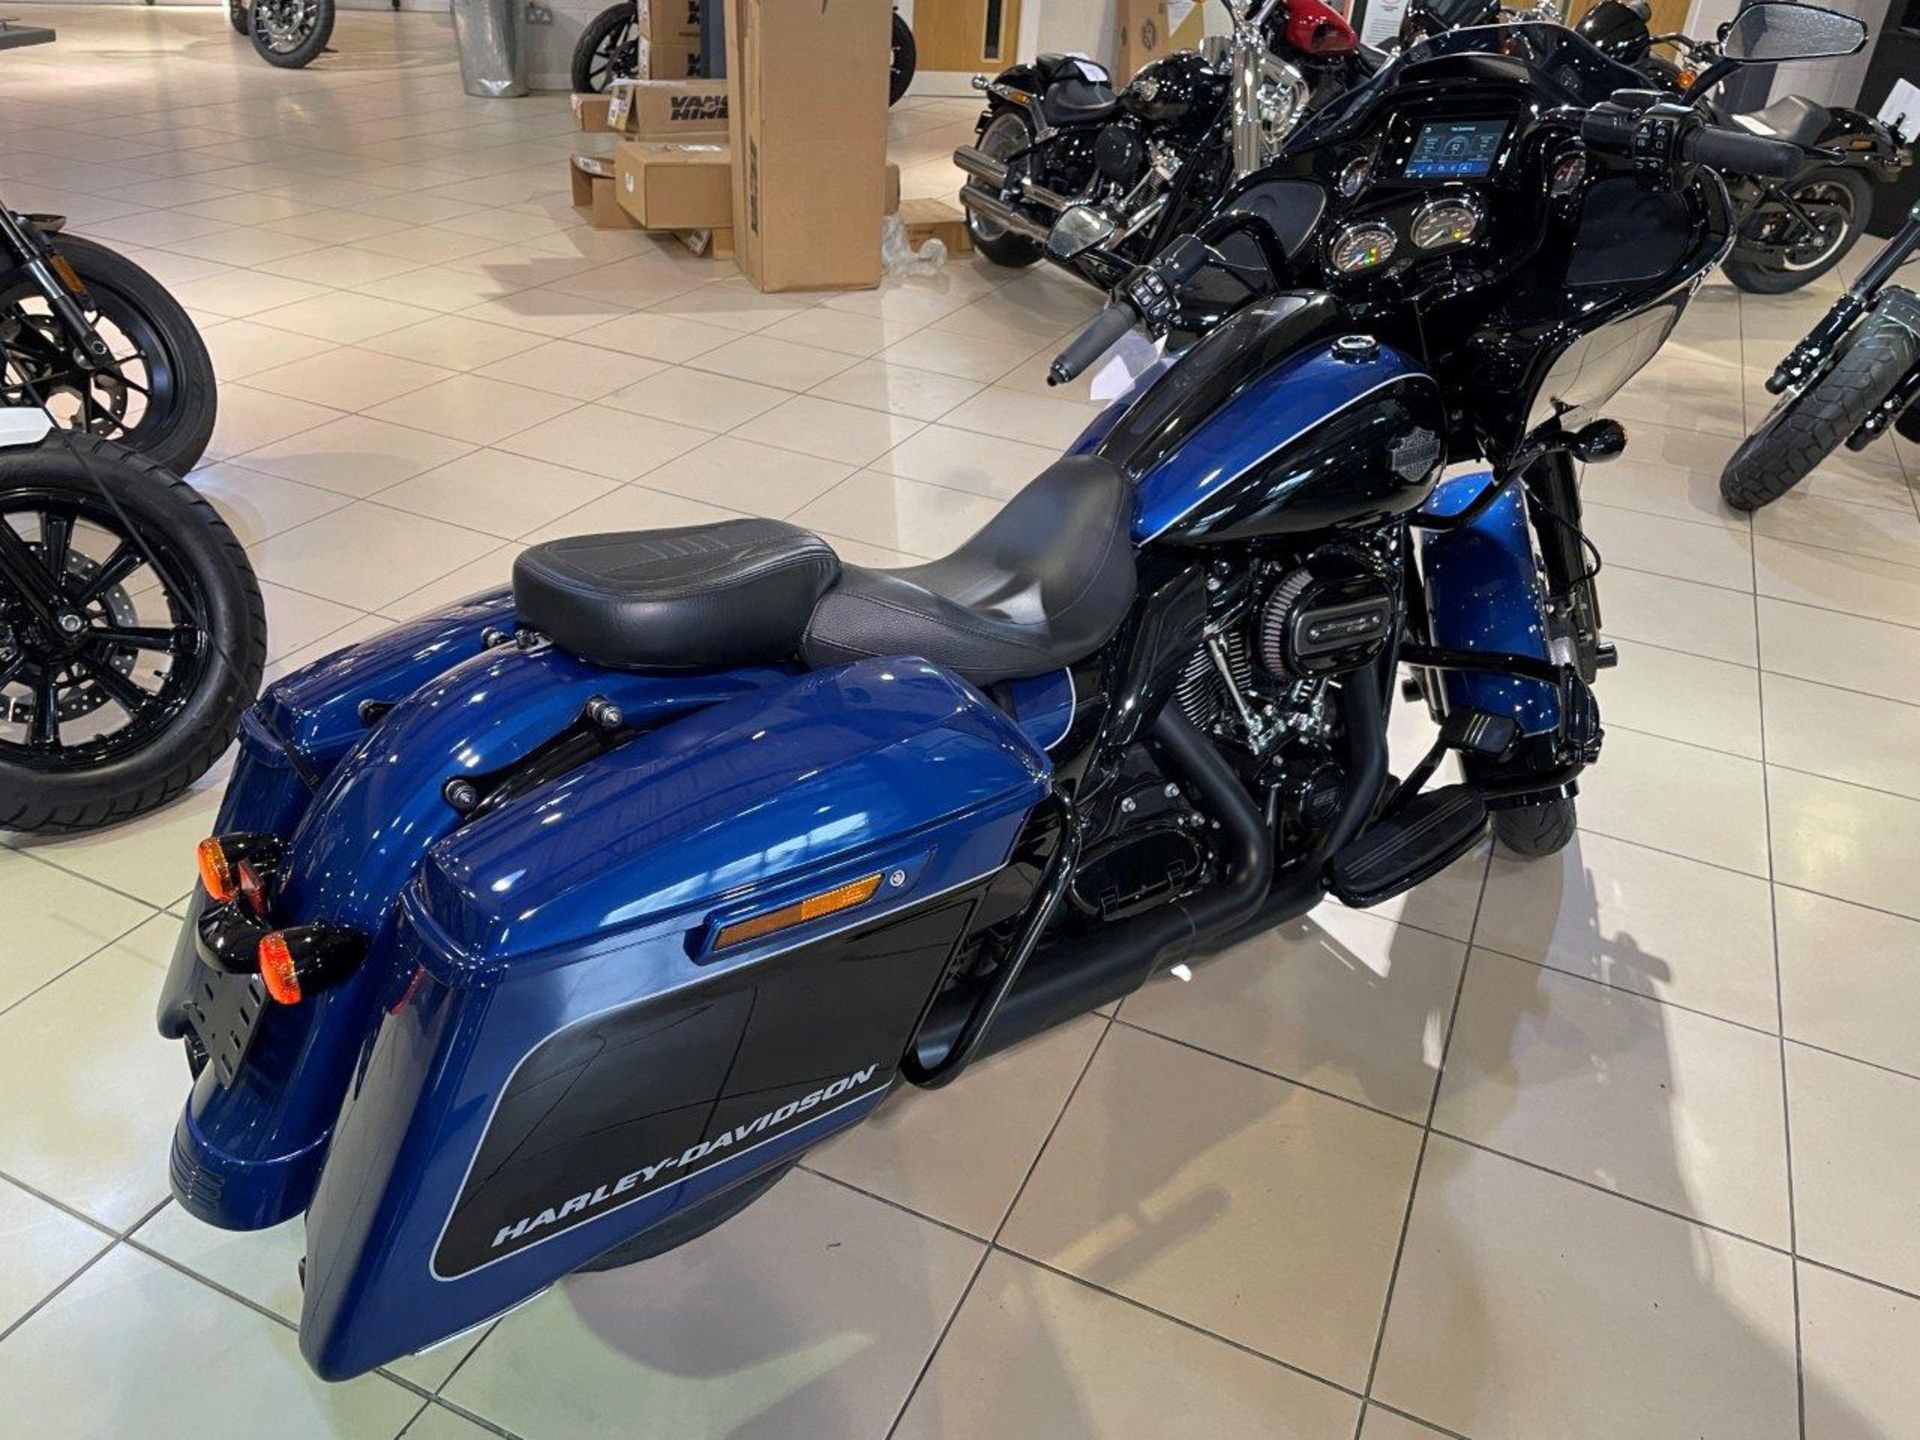 Harley Davidson FLTRXS Road Glide Special, with stage 3 upgrade Motorbike (May 2022) - Image 10 of 20